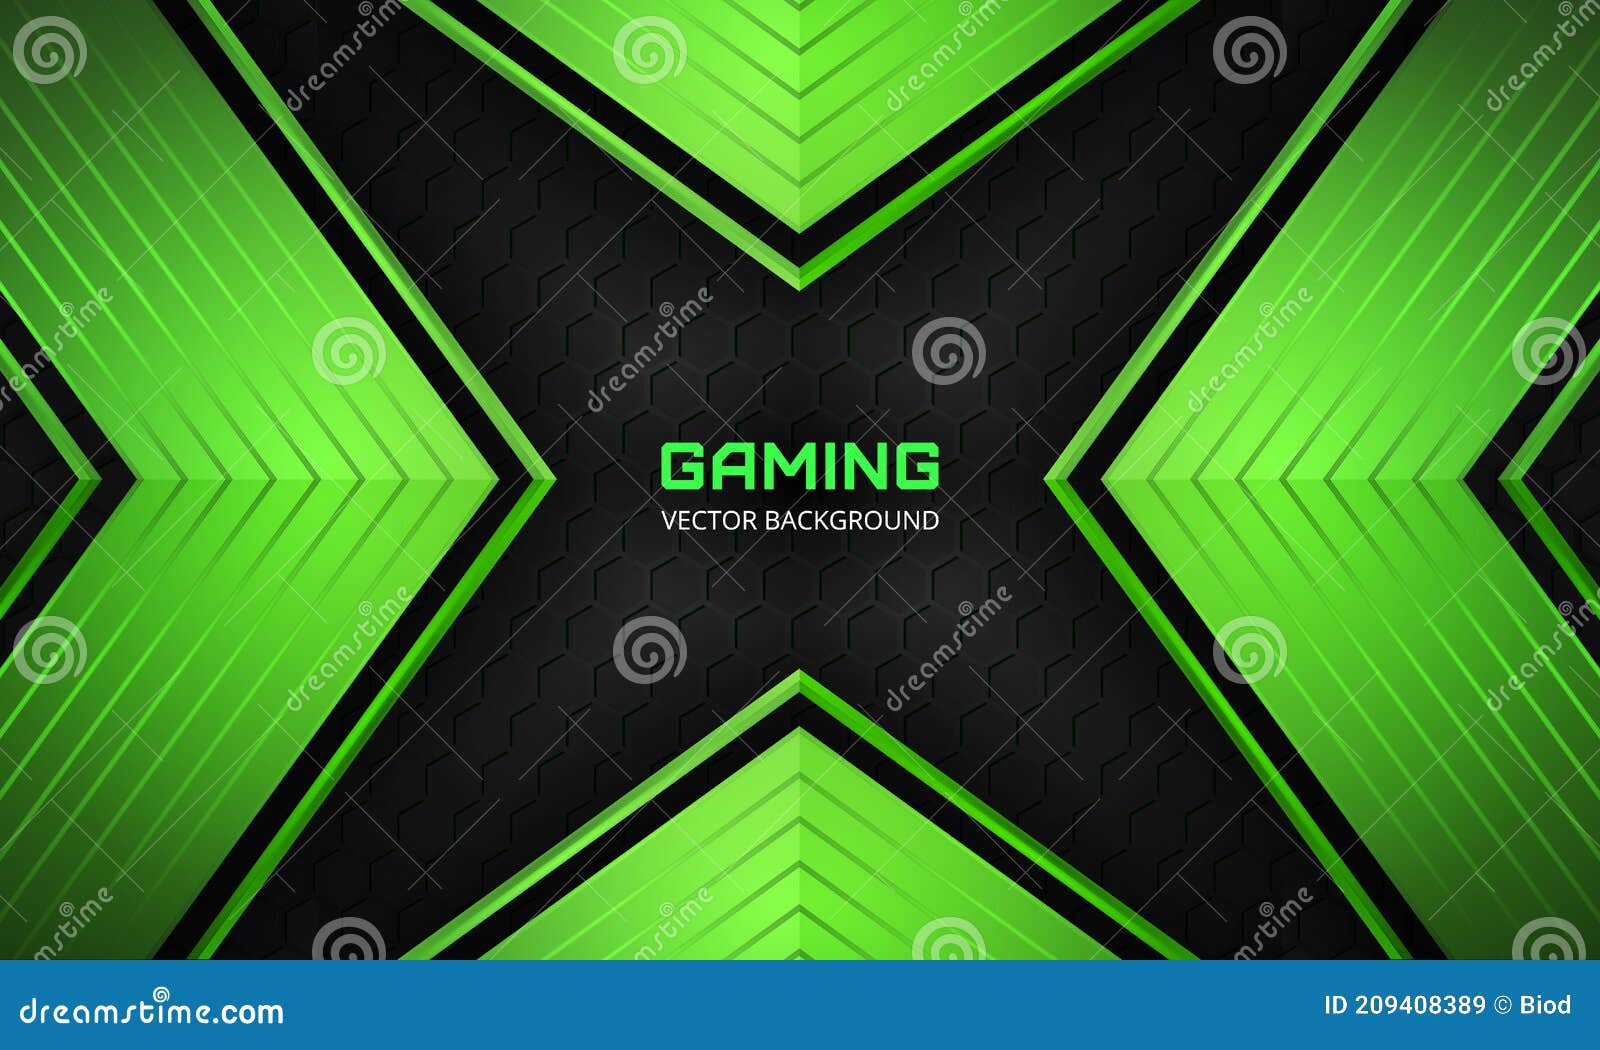 Futuristic Abstract Black and Green Gaming Banner. Dark Abstract Background  with Hexagon Carbon Fiber. Stock Vector - Illustration of bright, creative:  209408389